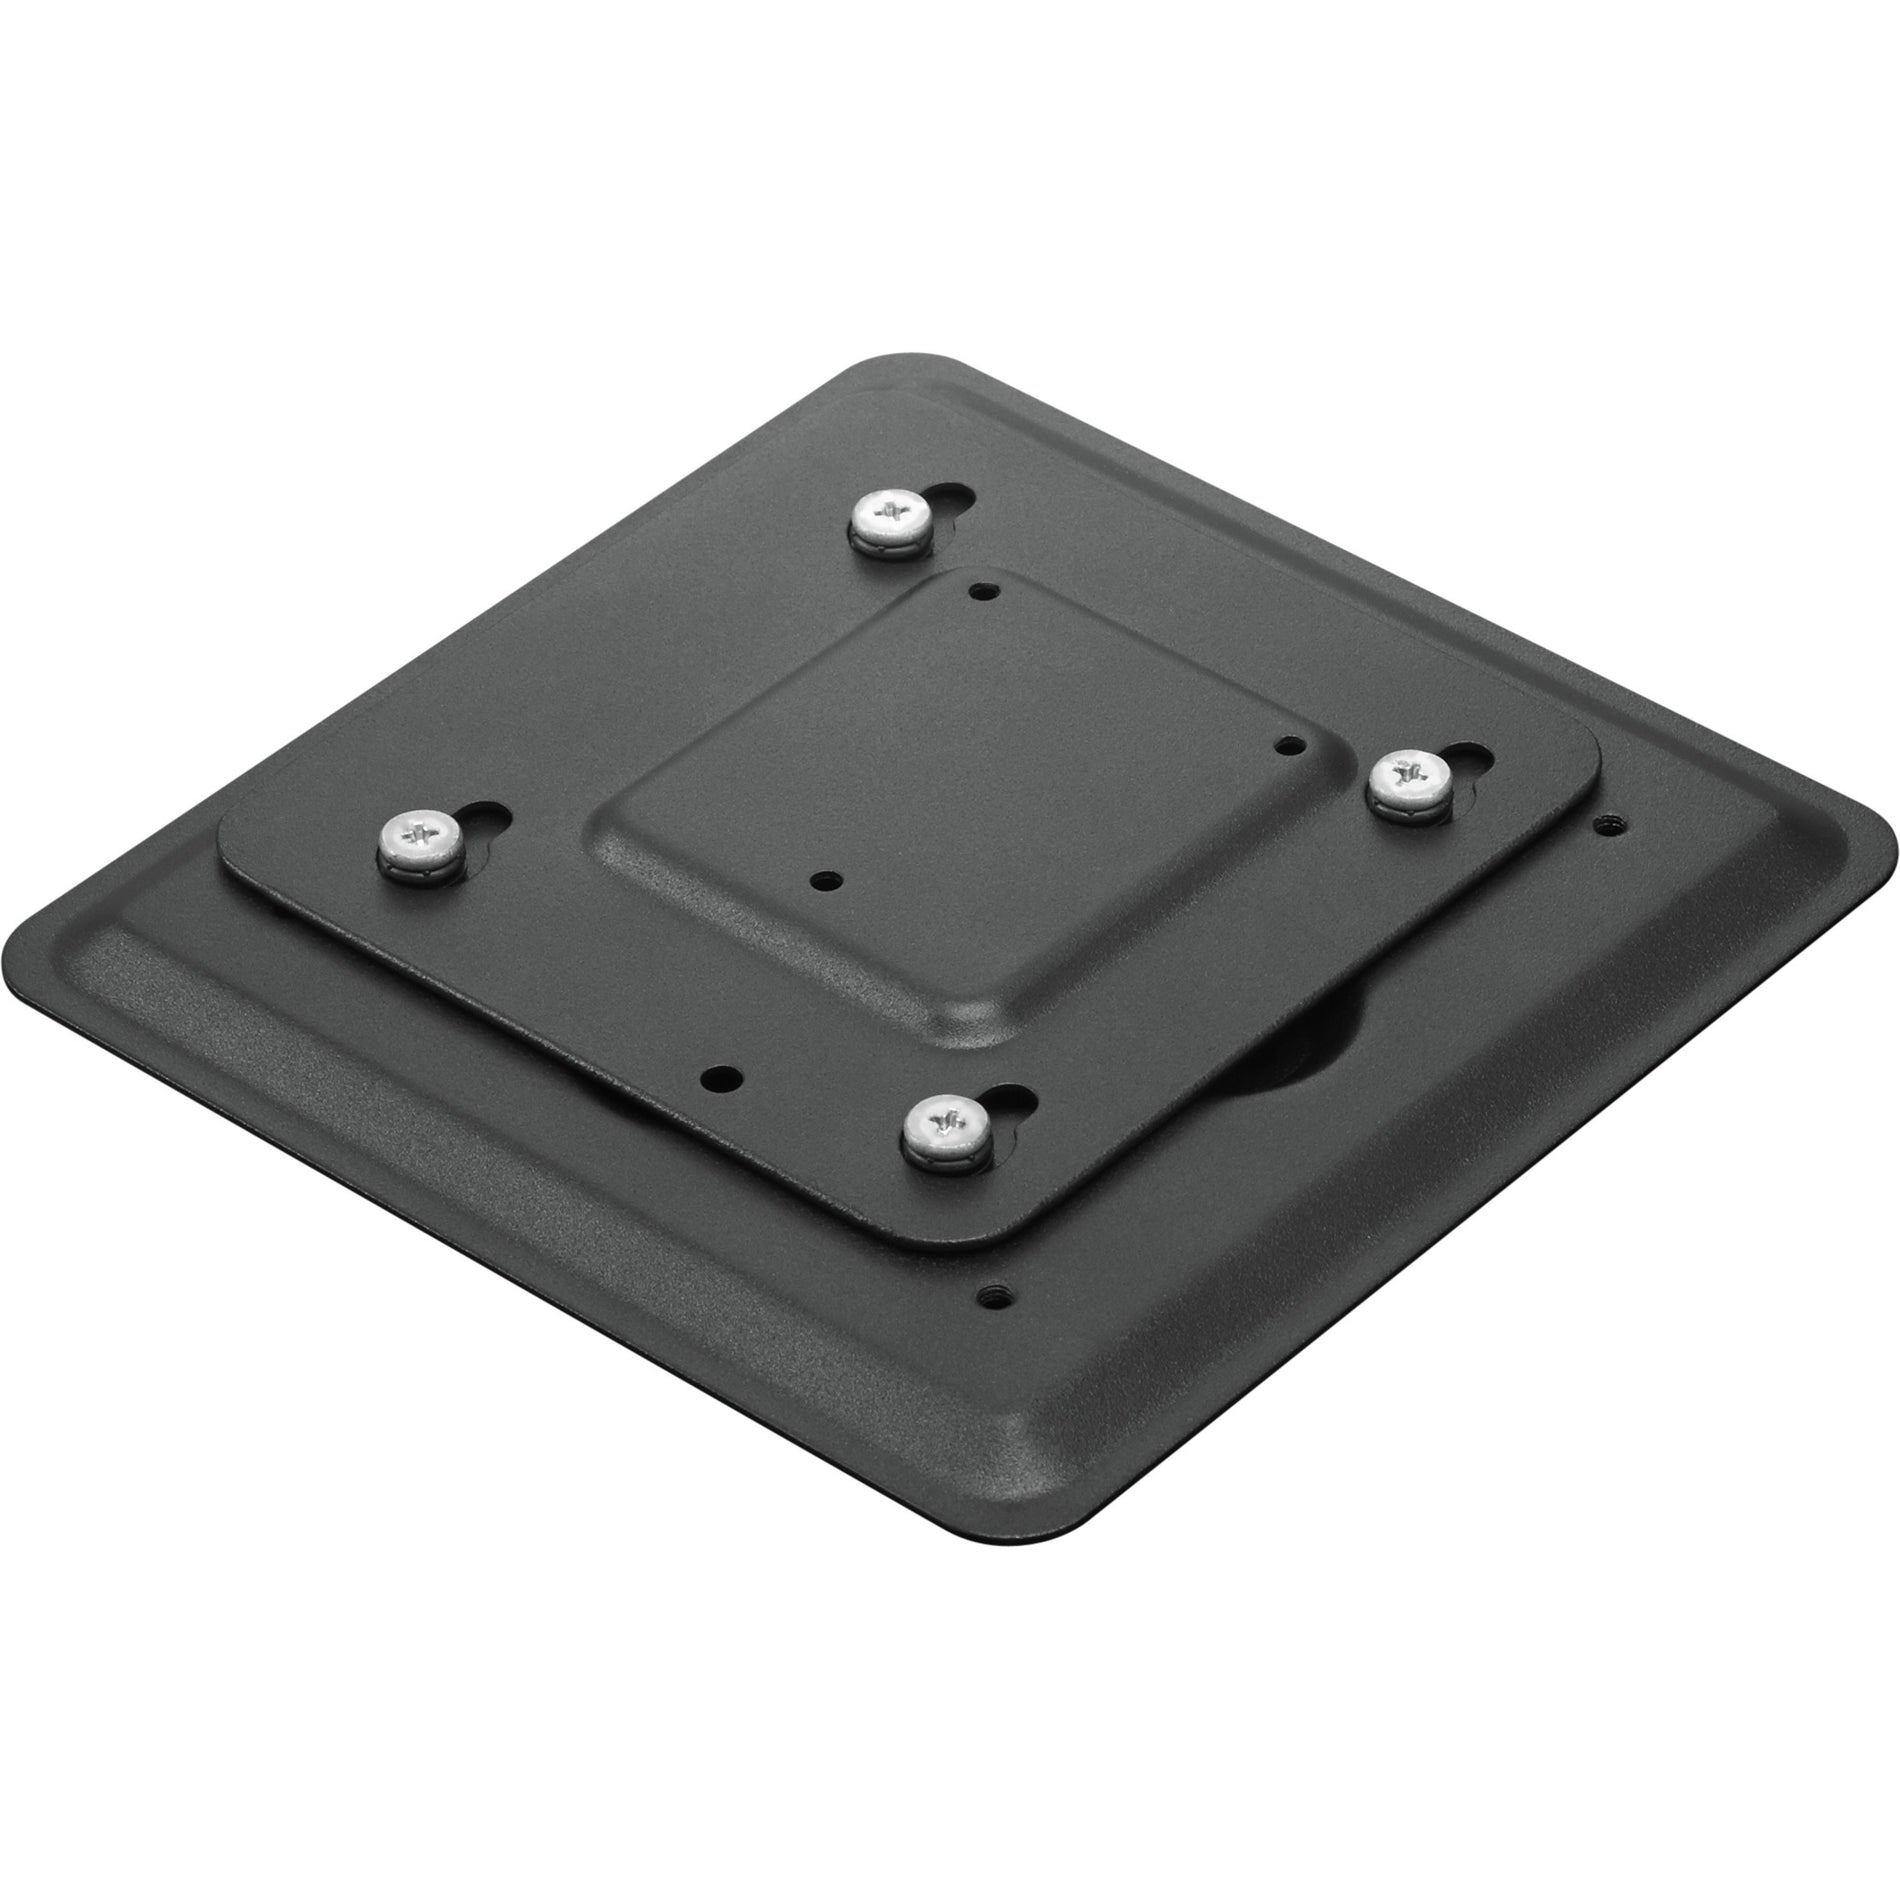 Lenovo 4XF0V81630 Mounting Bracket for Thin Client, Easy Installation and Space-saving Solution